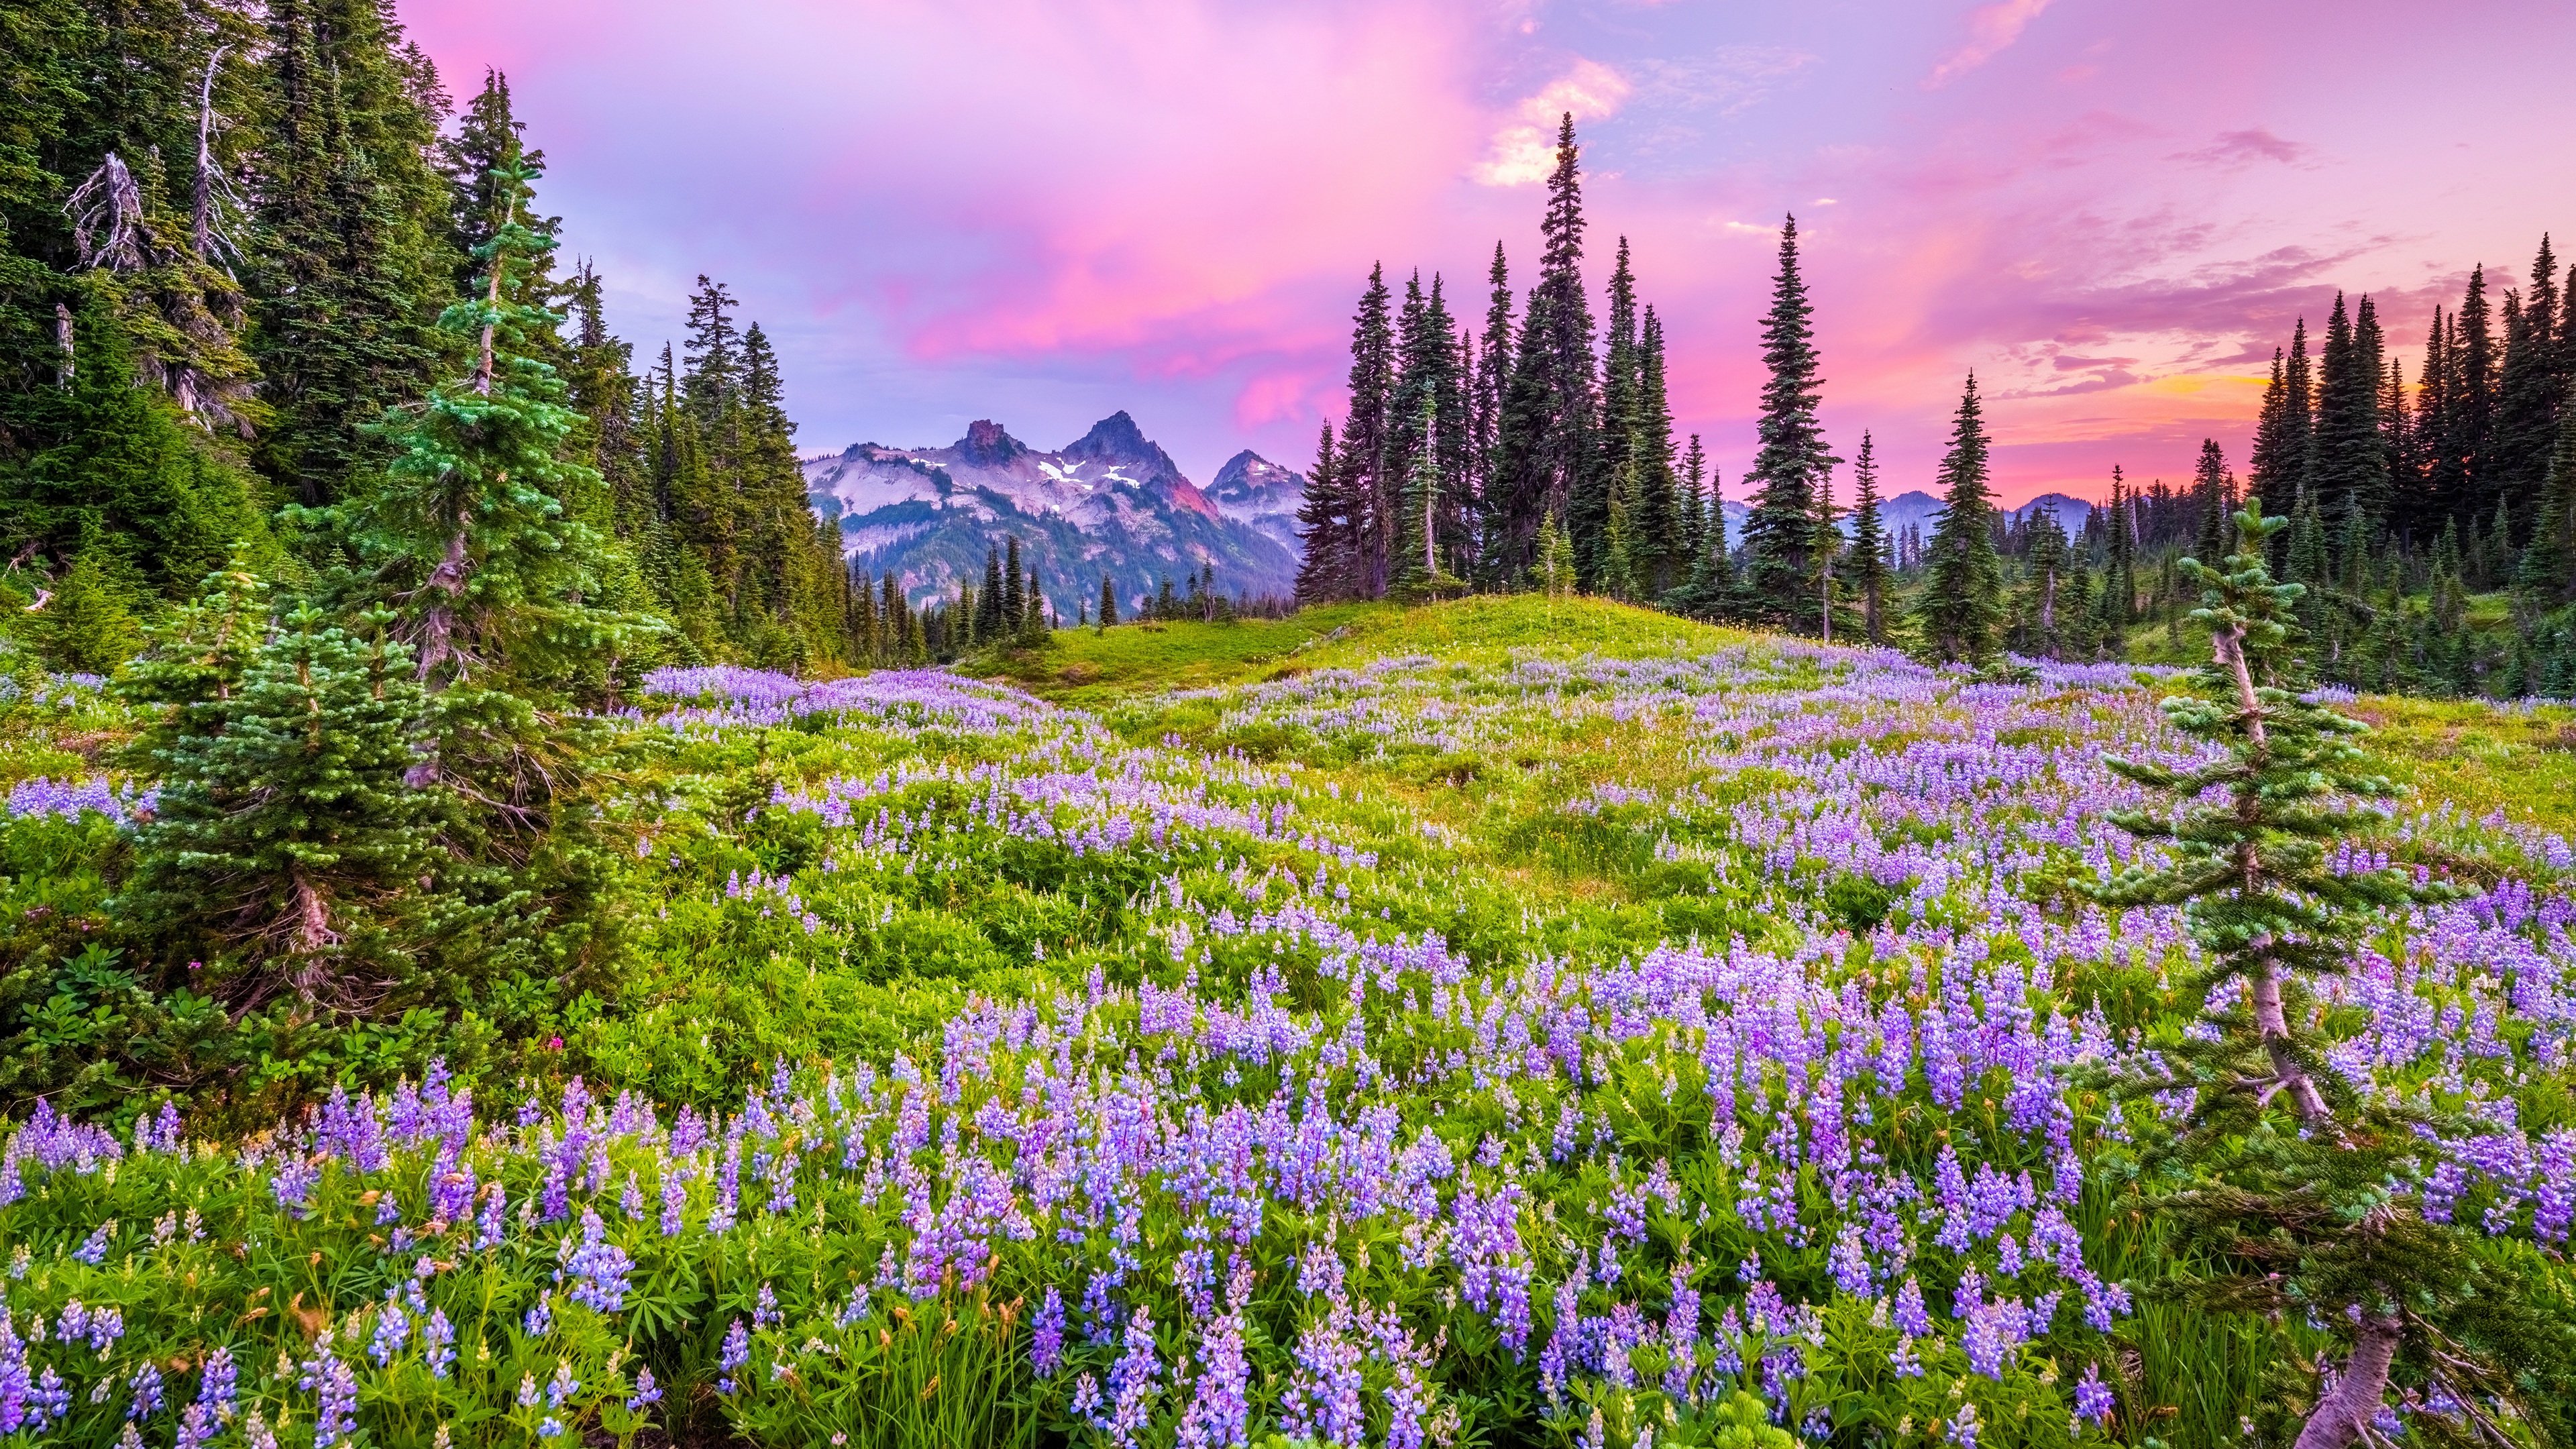 General 3840x2160 Mount Rainier National Park USA nature field sky clouds trees mountains sunset lupines flowers